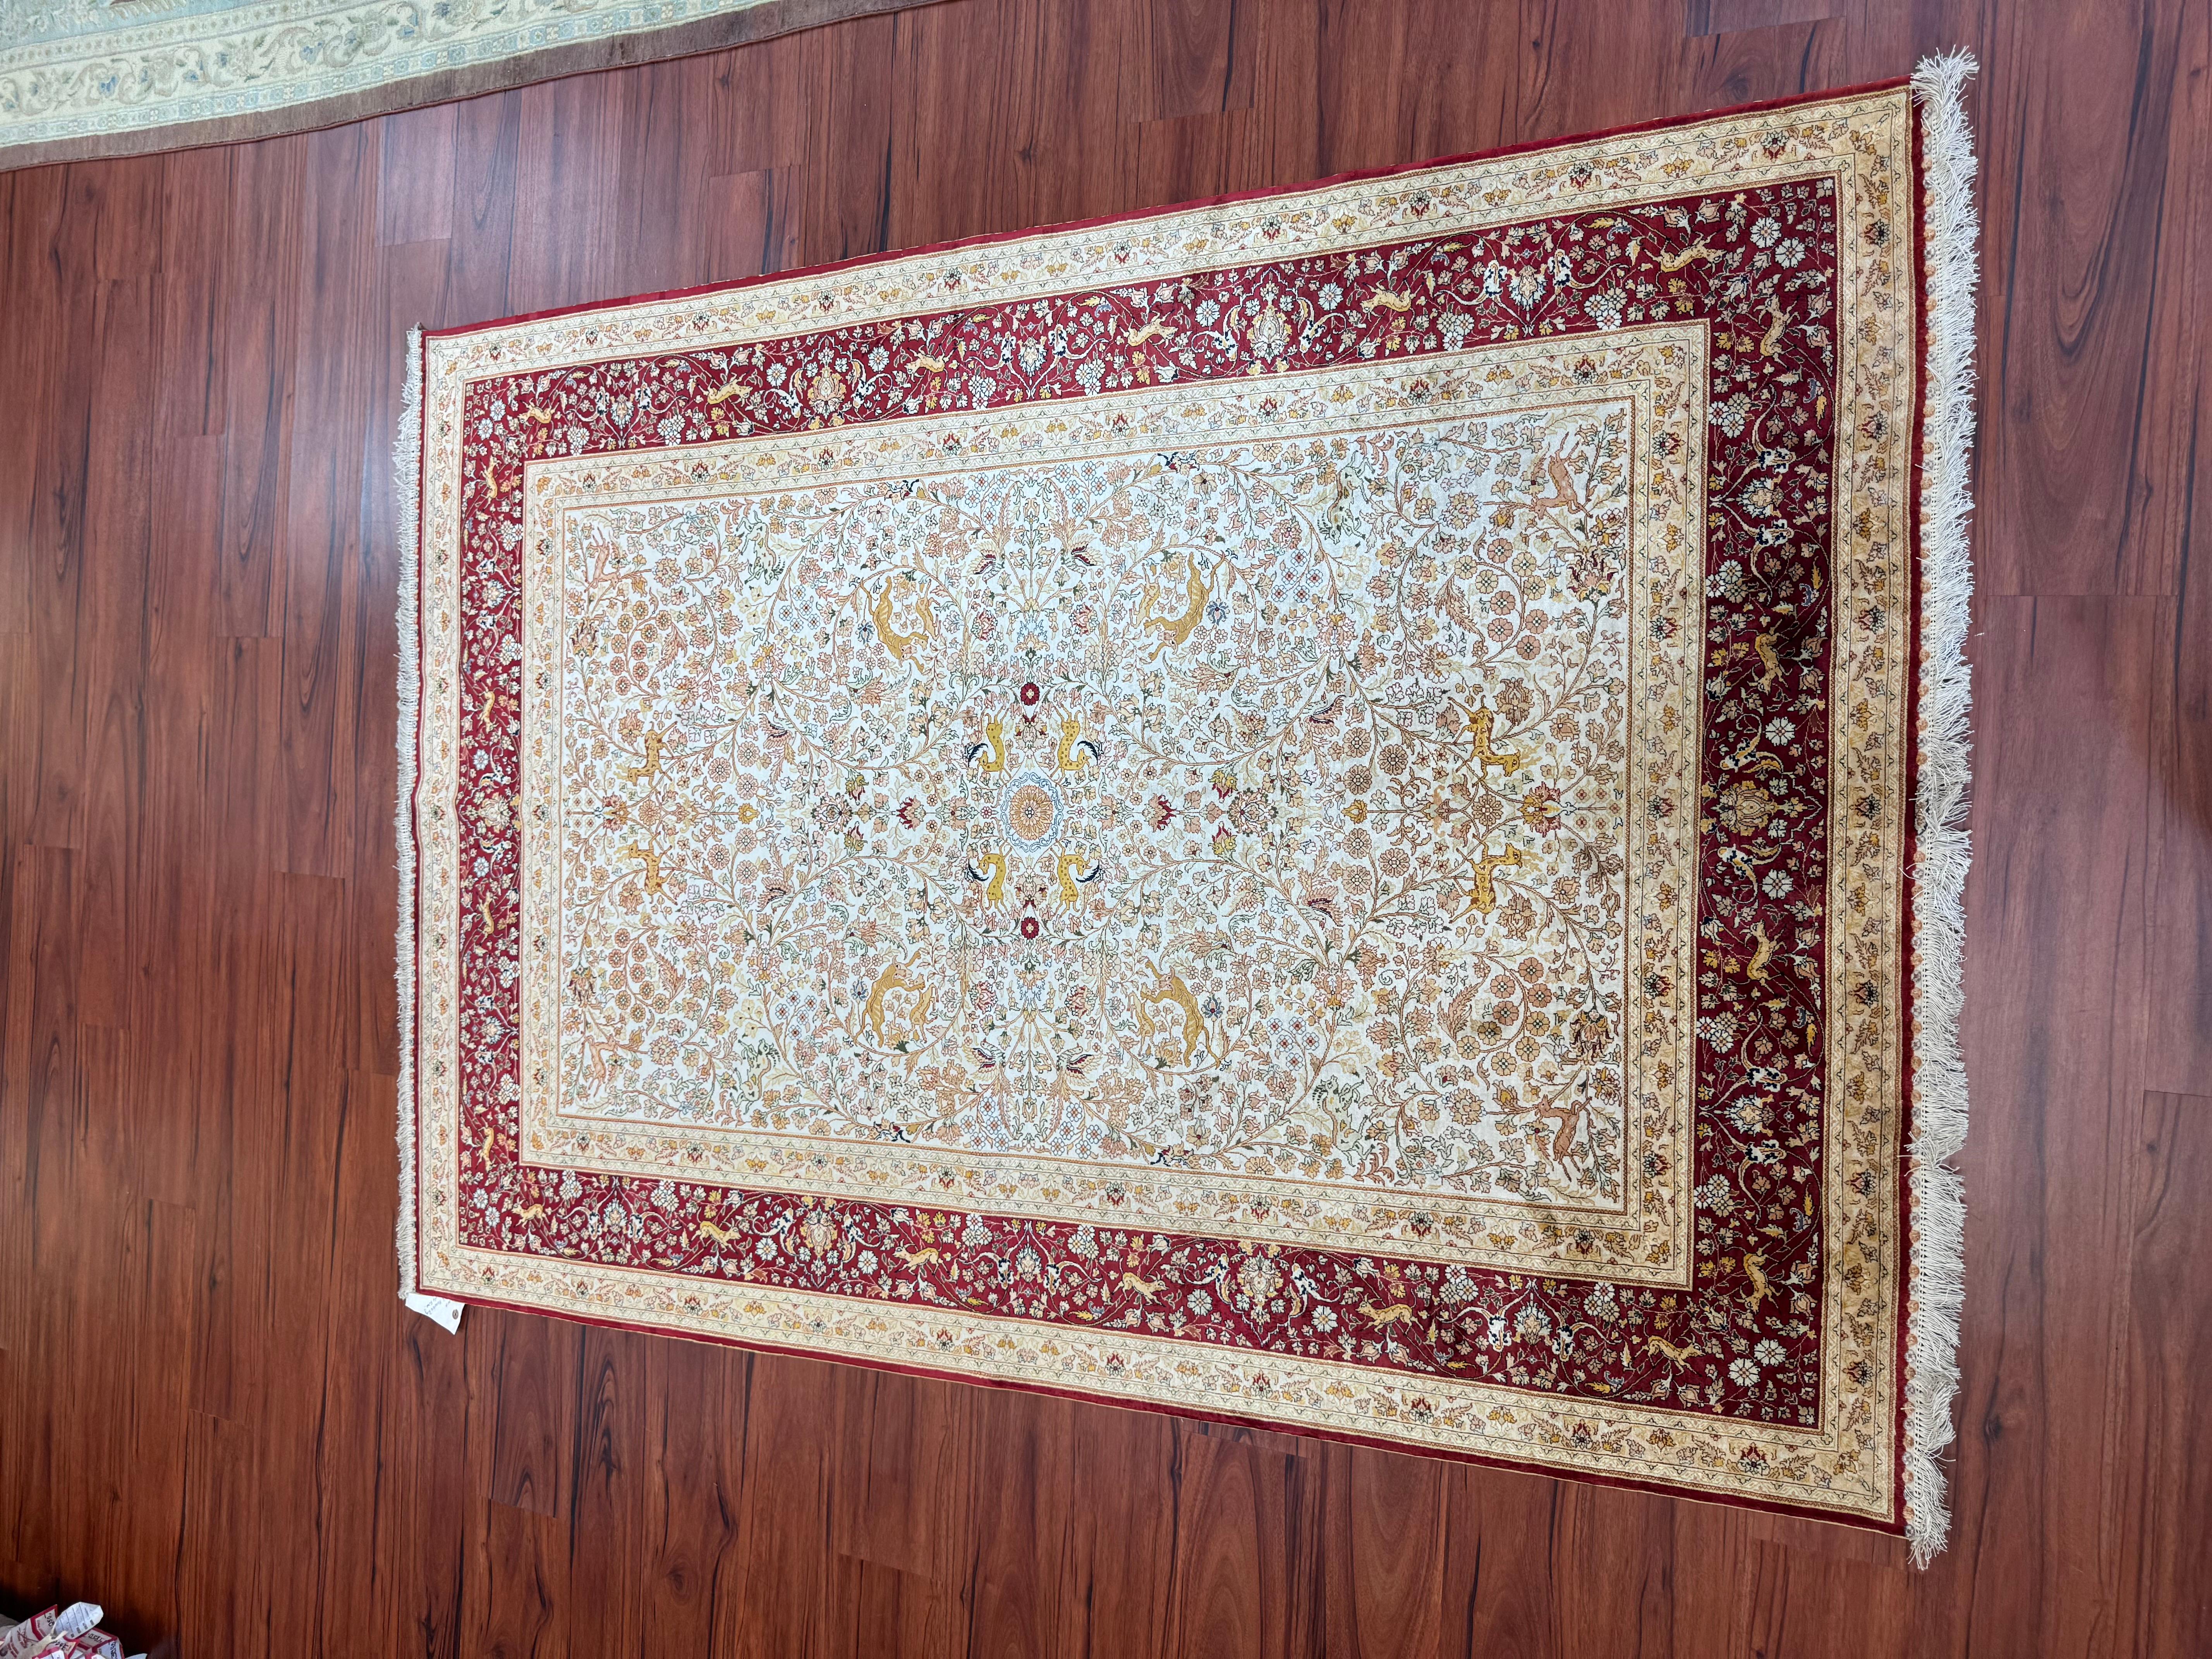 A stunning Extremly Fine Turkish Hereke Rug that originates from turkey in the late 20th century. This rug is in excellent condition and is truly beautiful. It is made from 100% silk and has a gorgeous color combination to match its design!